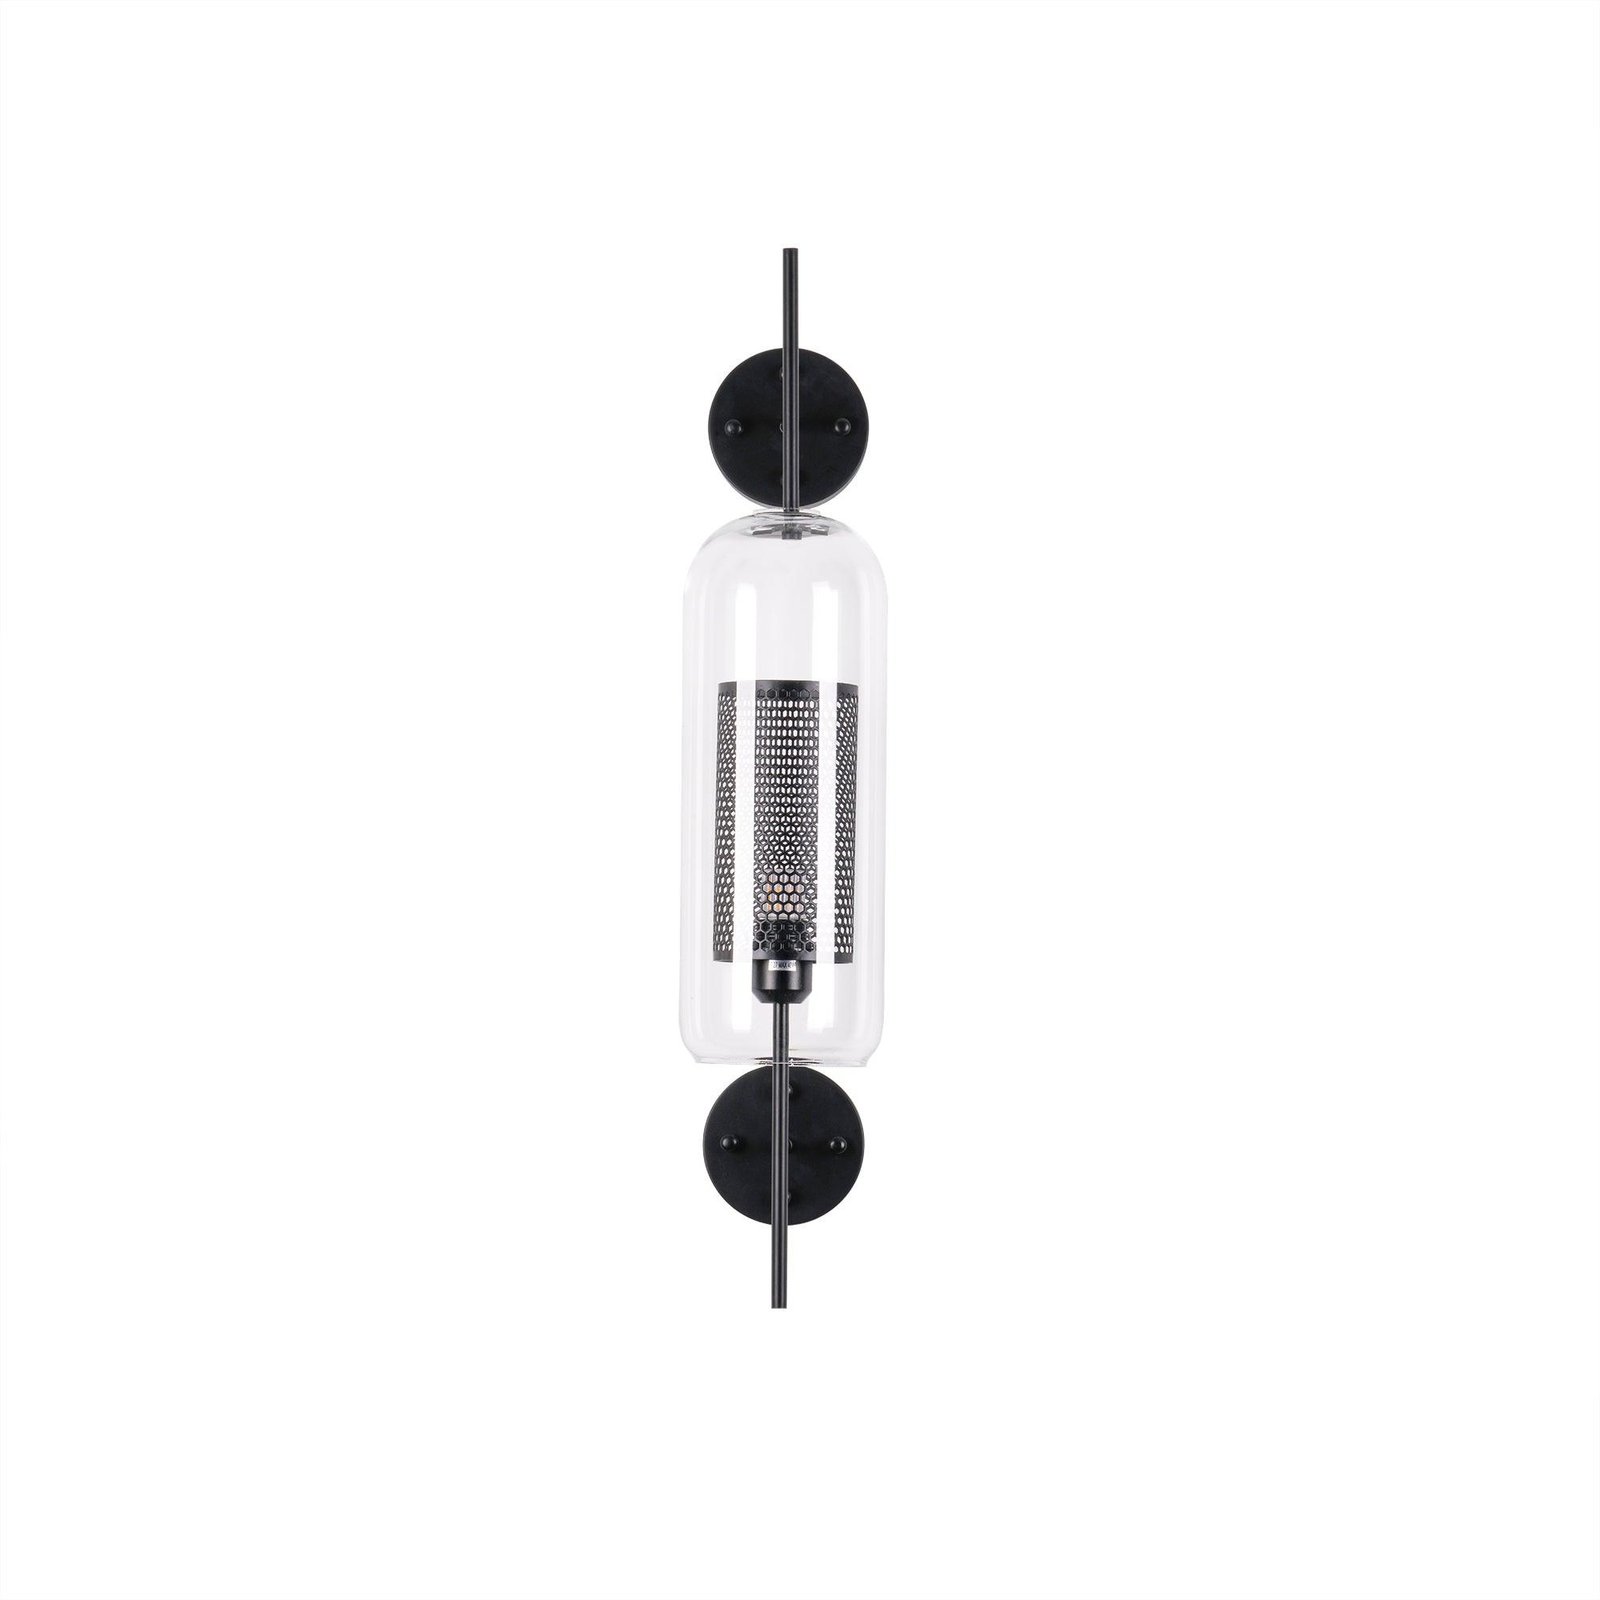 Chiswick Glass Wall Light in Black and Clear with a Diameter of 5.9" and Height of 30.7" (15cm x 78cm)